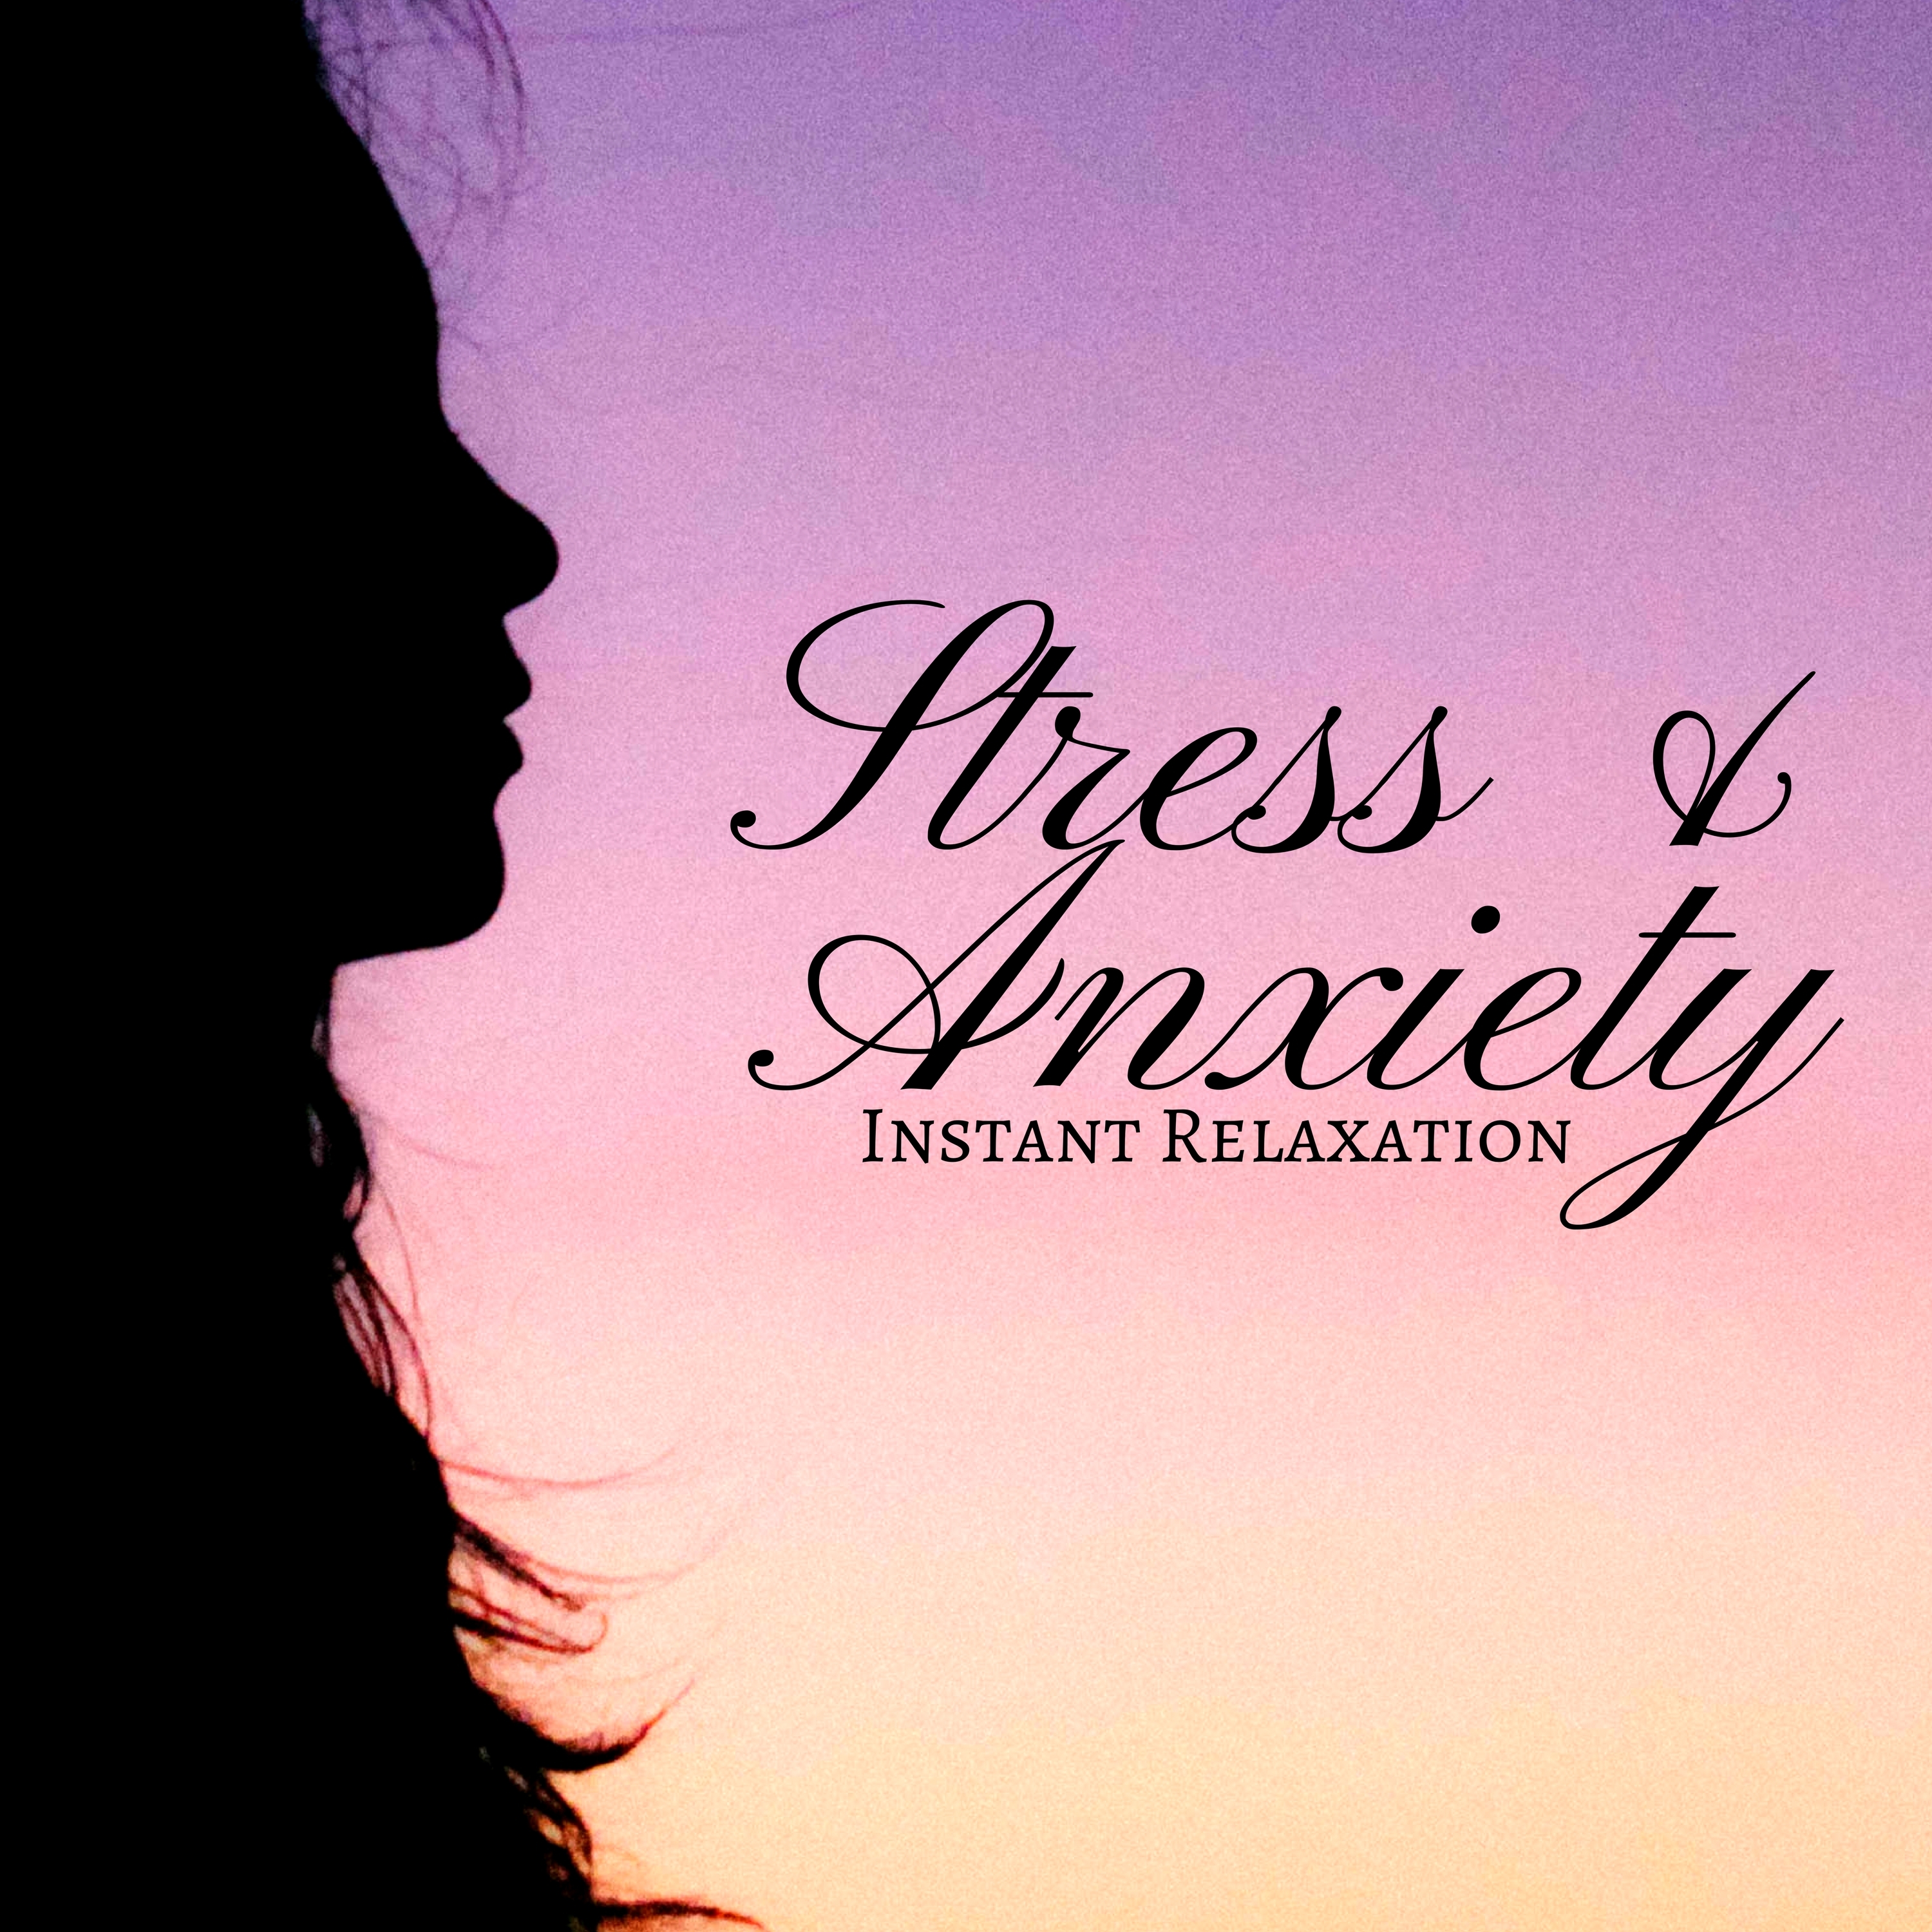 Stress & Anxiety - Instant Relaxation, Soothing Meditation Sounds, Positive Affirmations, Insomnia, Feel Calm